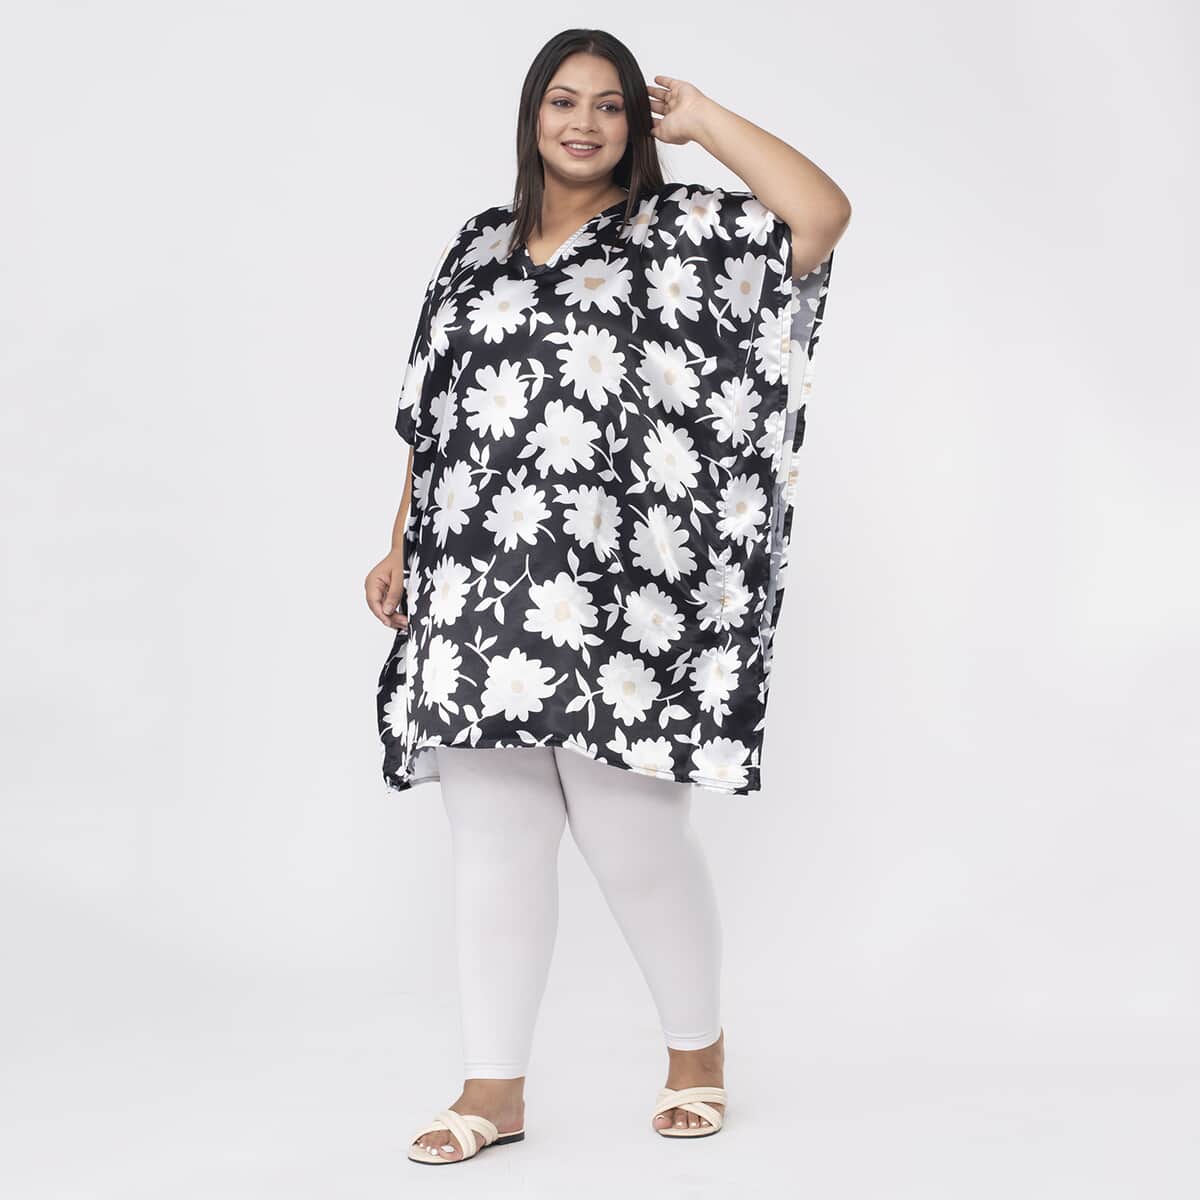 Tamsy Black and White Daisy Floral Printed Short Kaftan - One Size Fits Most image number 2